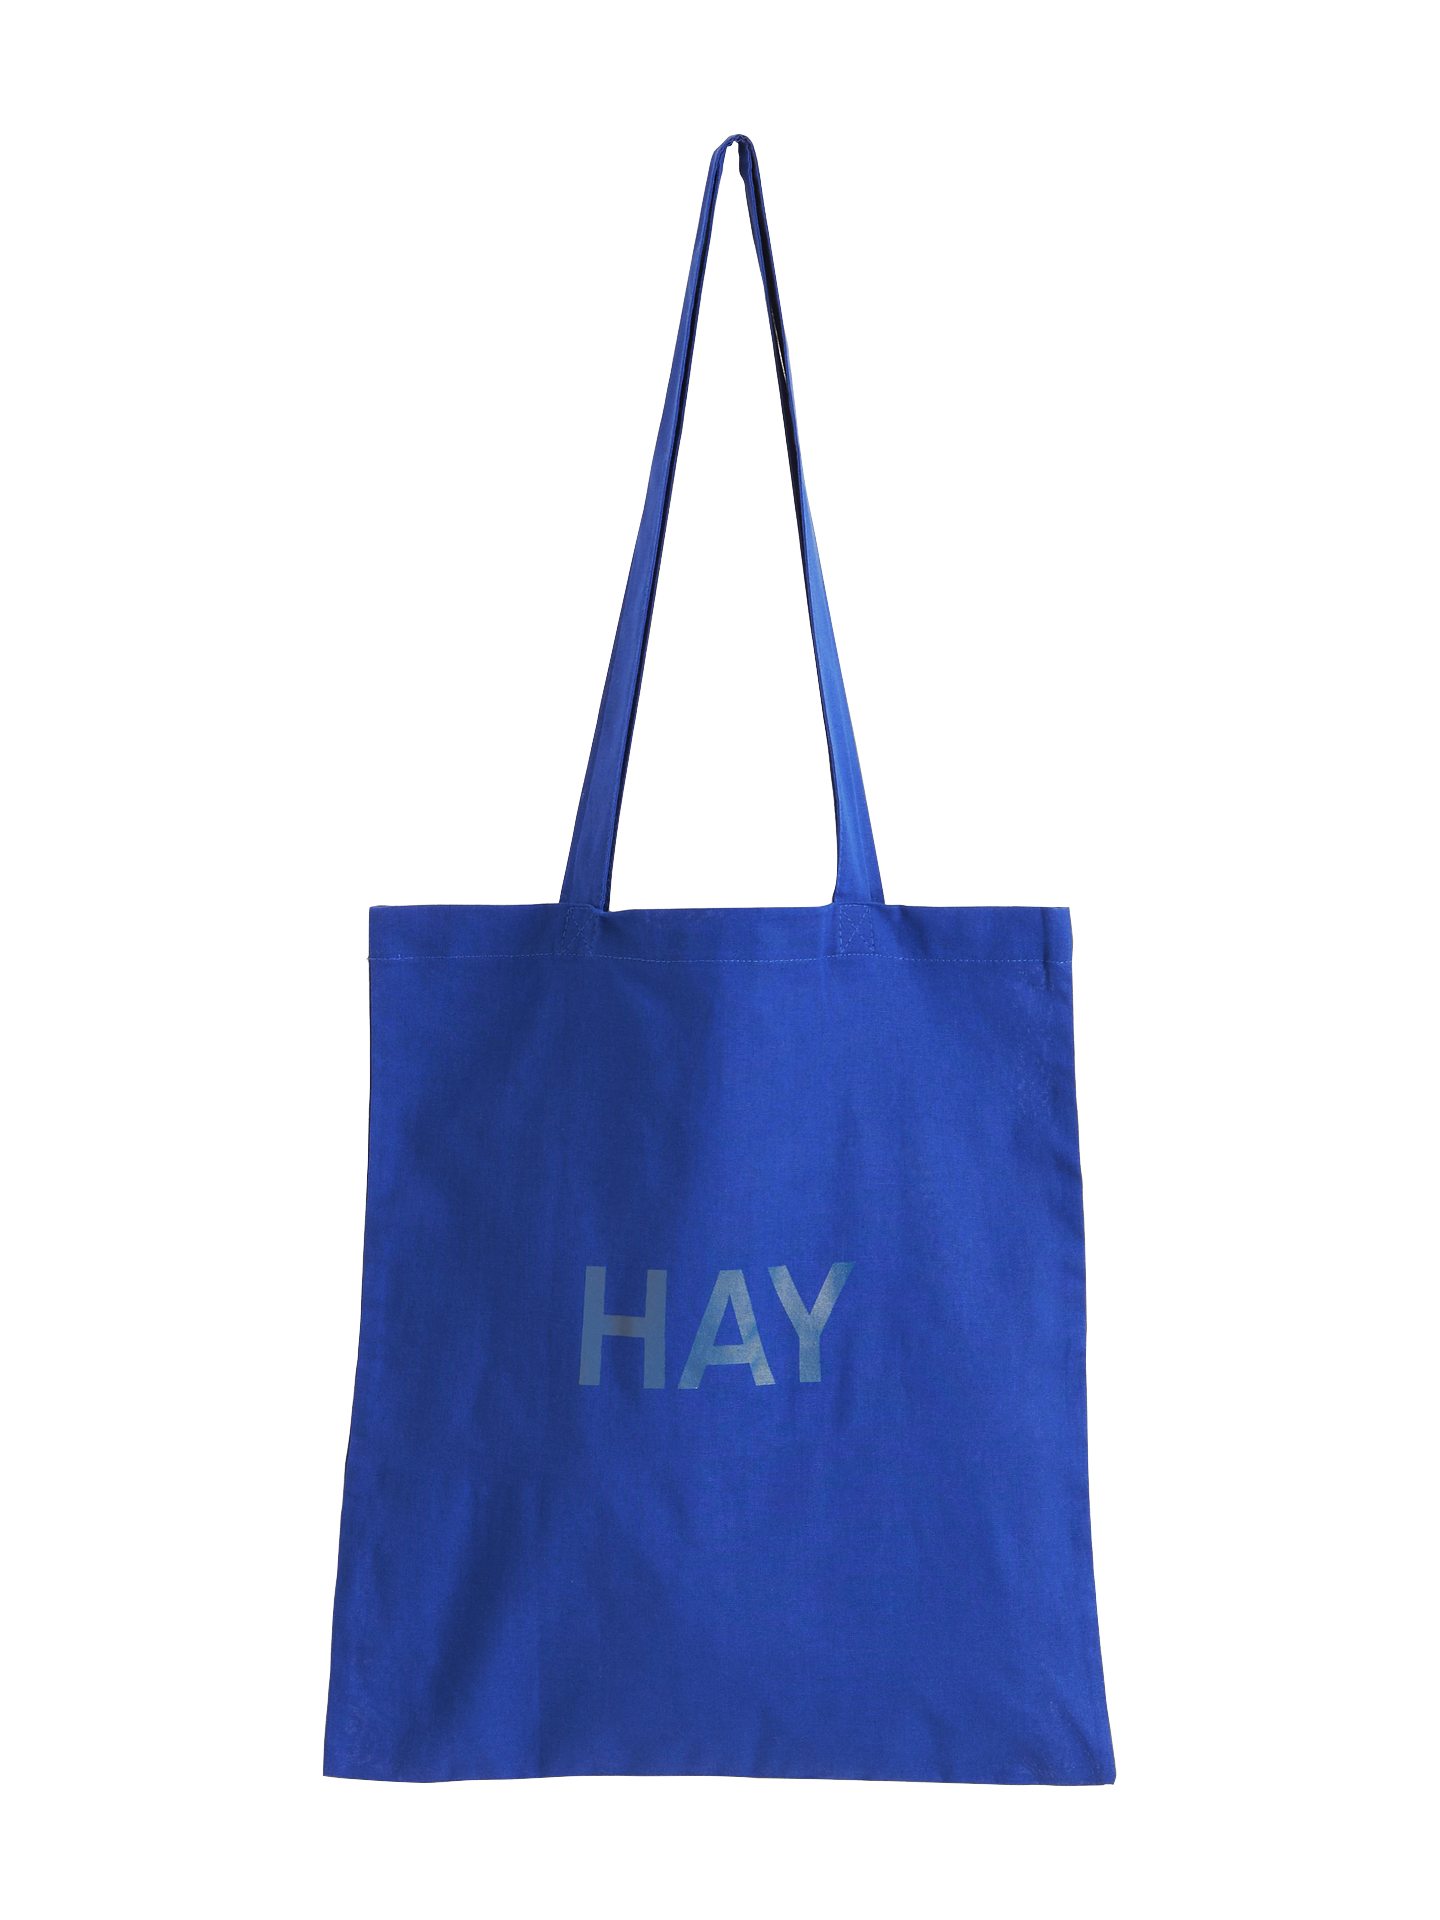 HAY Tote Bag, 5 colours